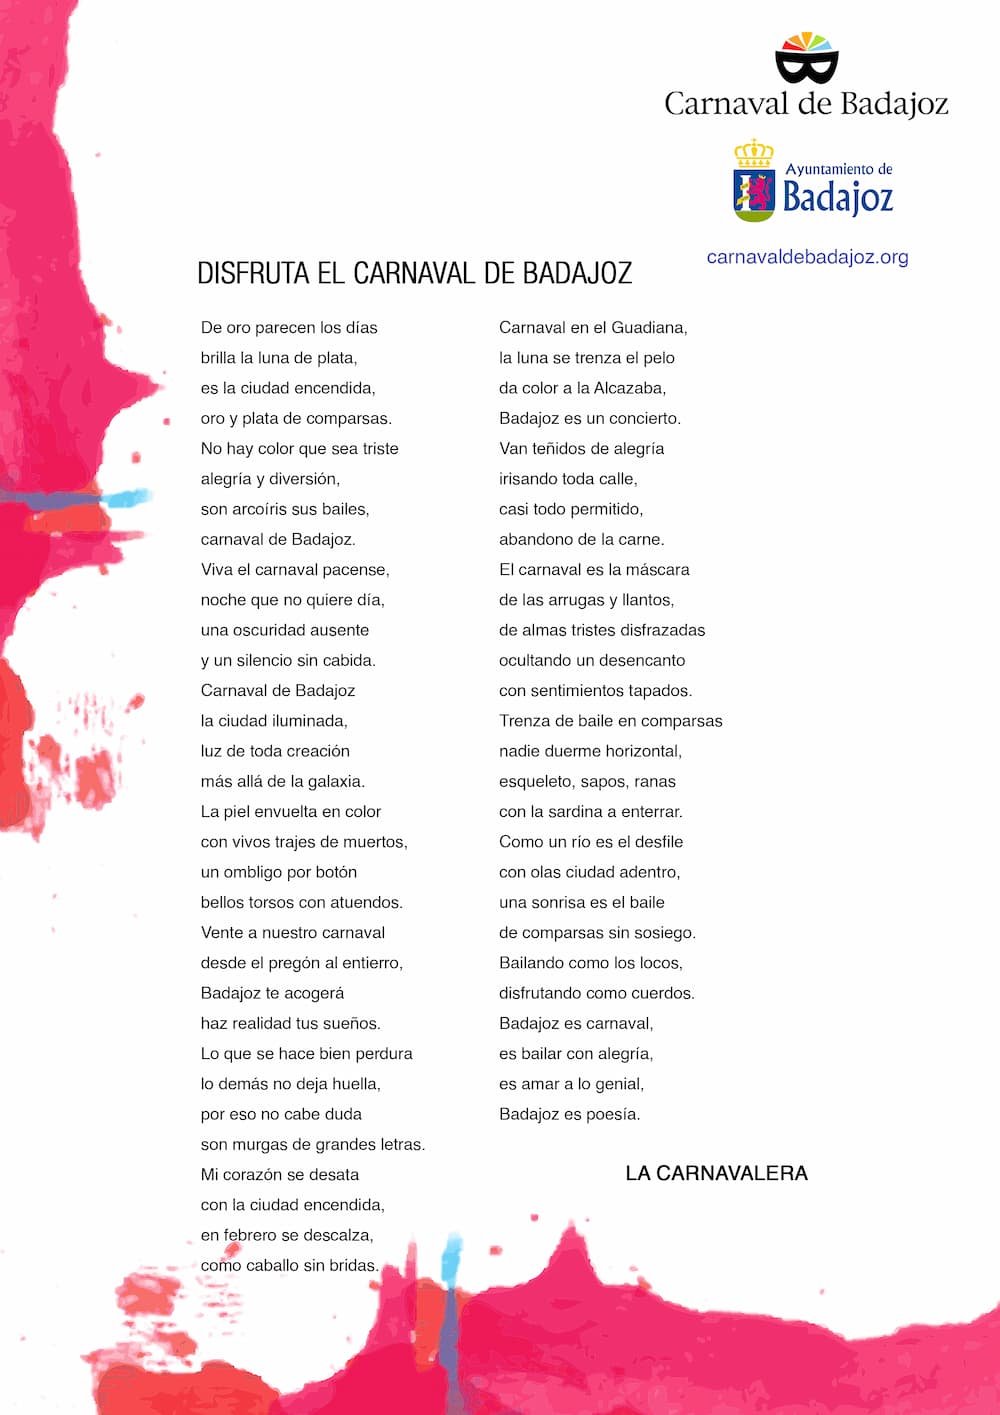 Participants in the 40th Anniversary of the Carnival of Badajoz Poetry and Photography Competition